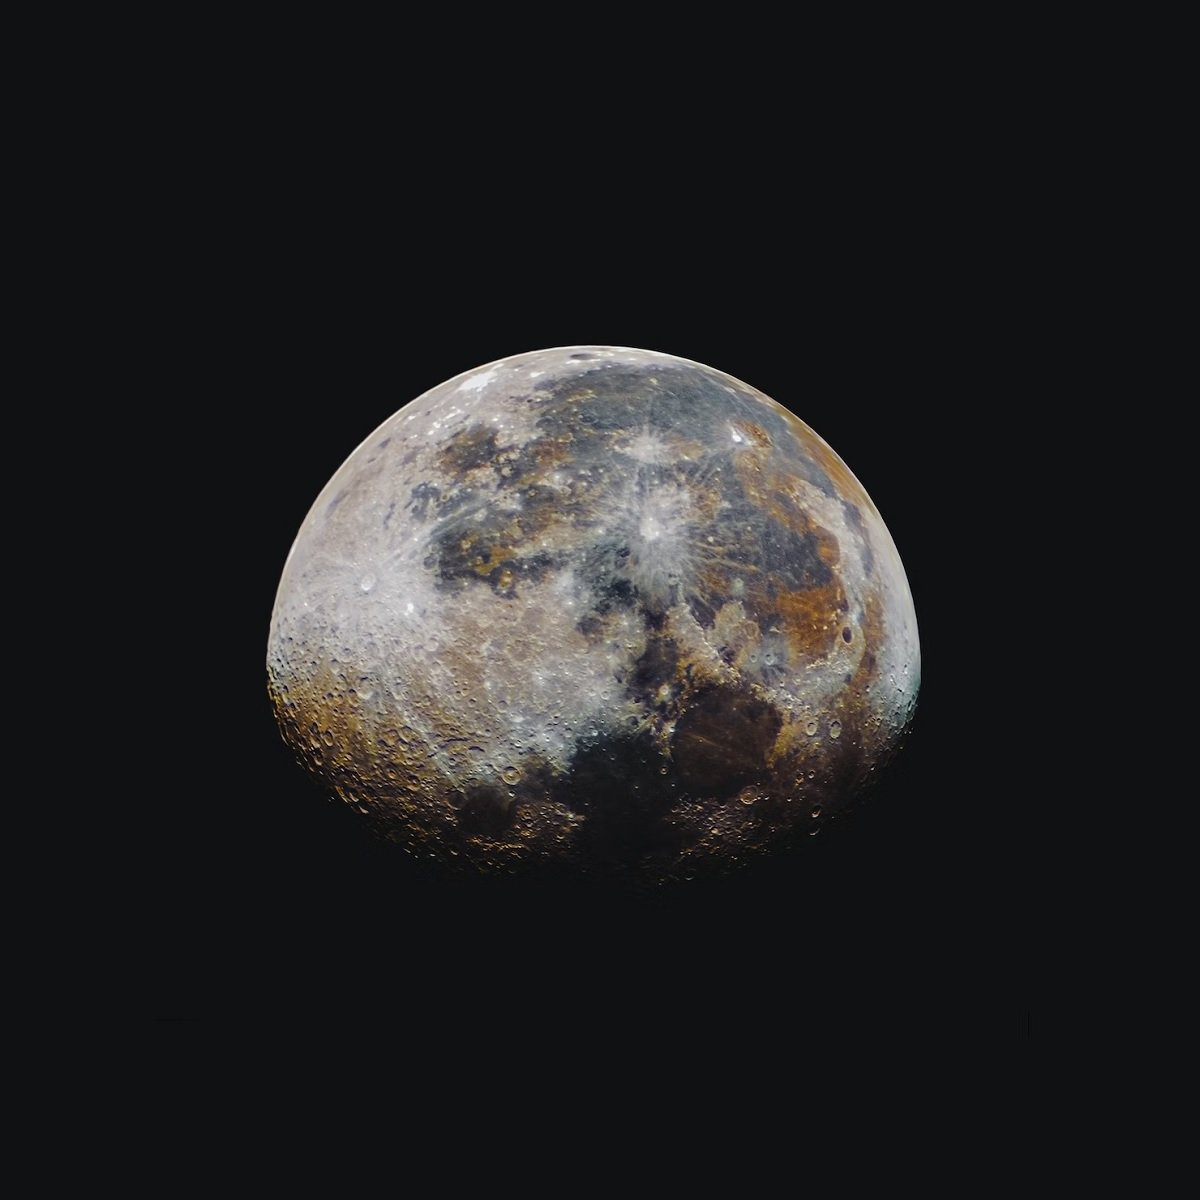 Detailed image of the moon